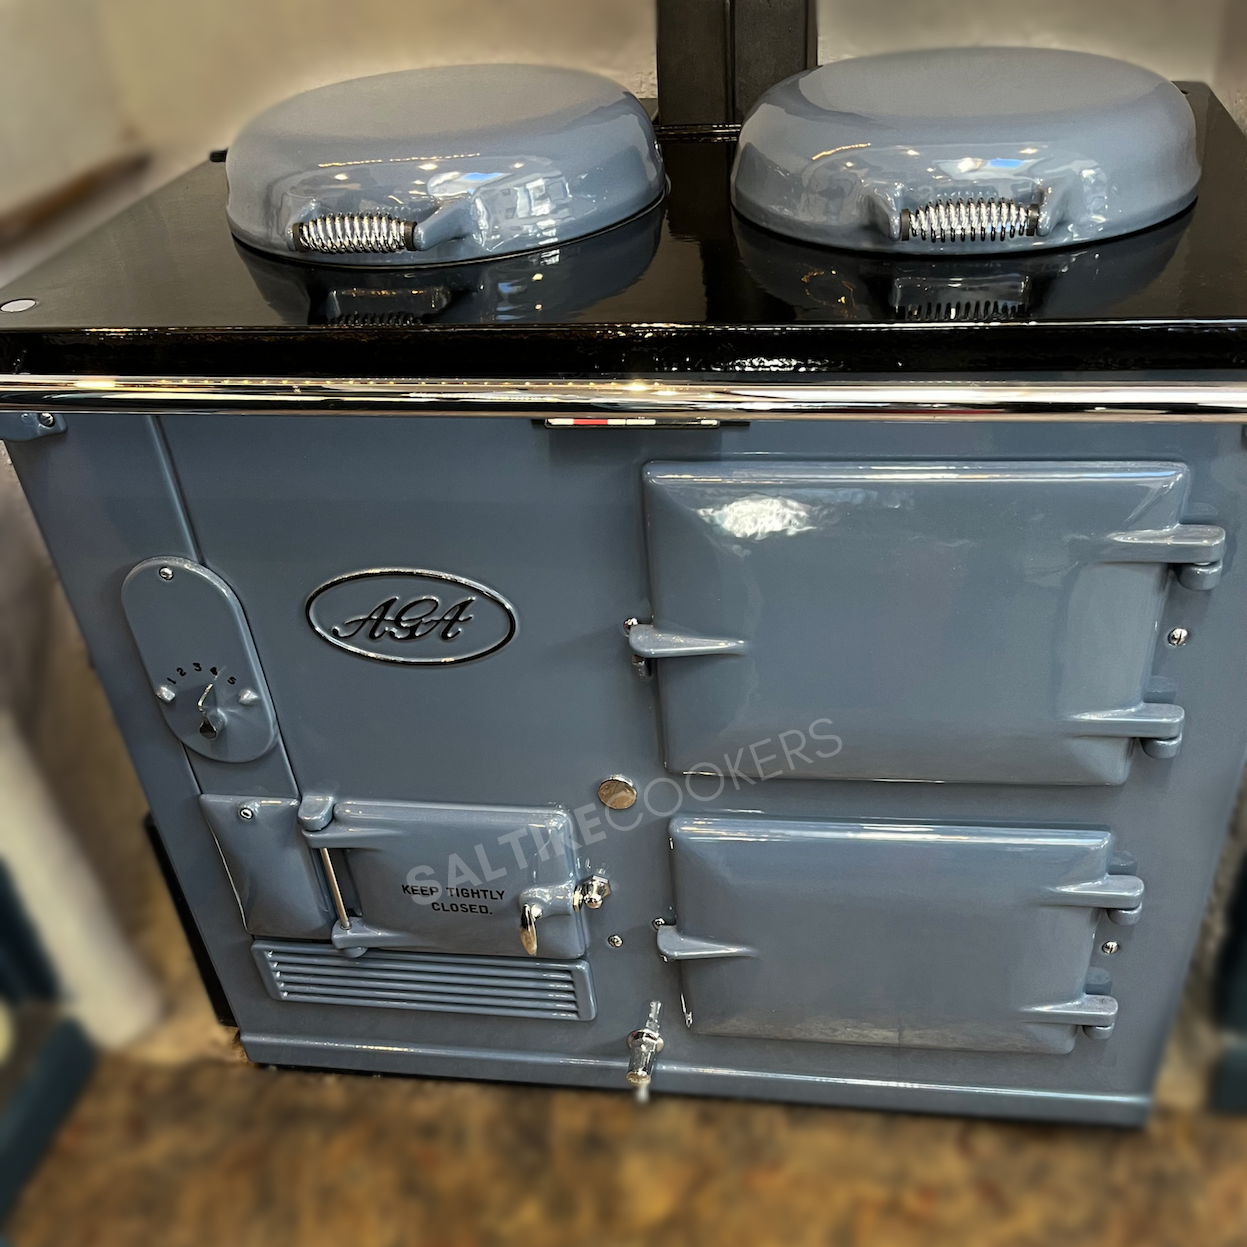 Reconditioned 2 Oven Gas Aga Cooker (Loch Blue)